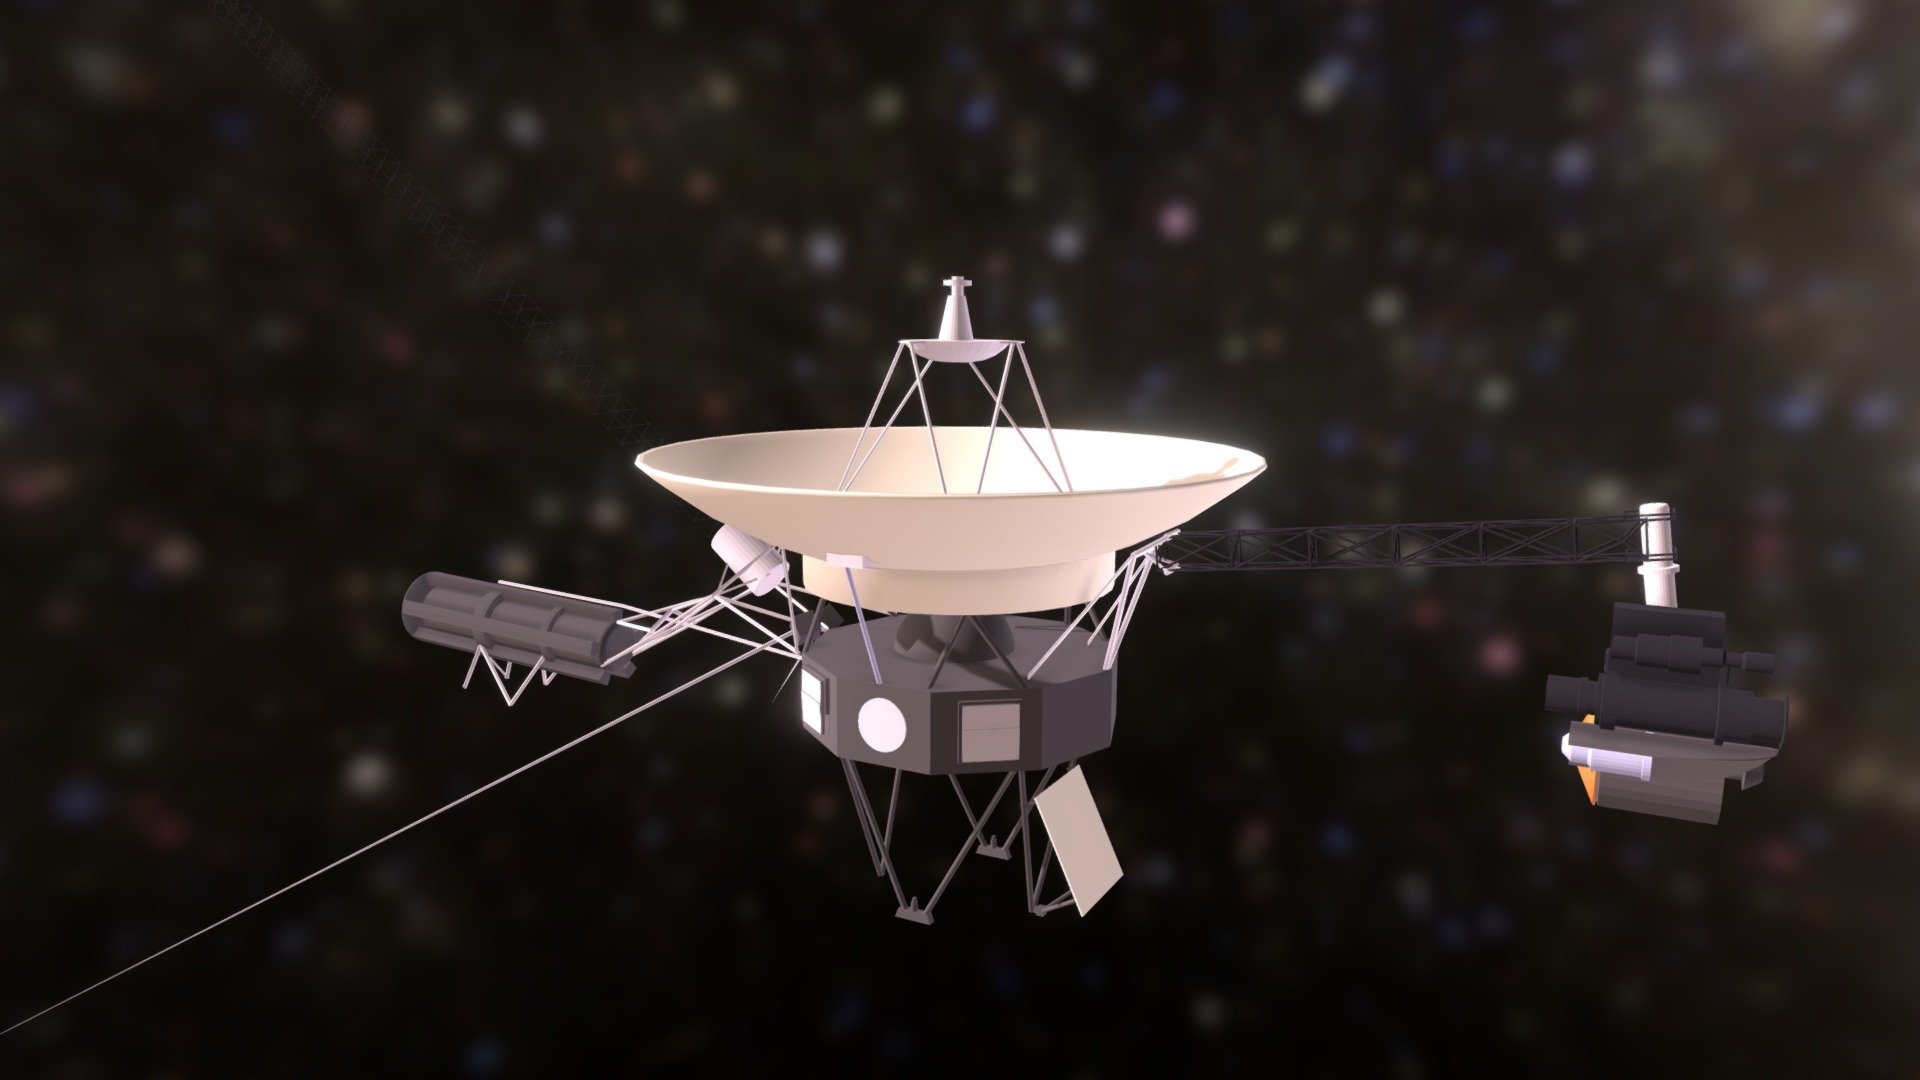 Voyager Model (my first blender project)